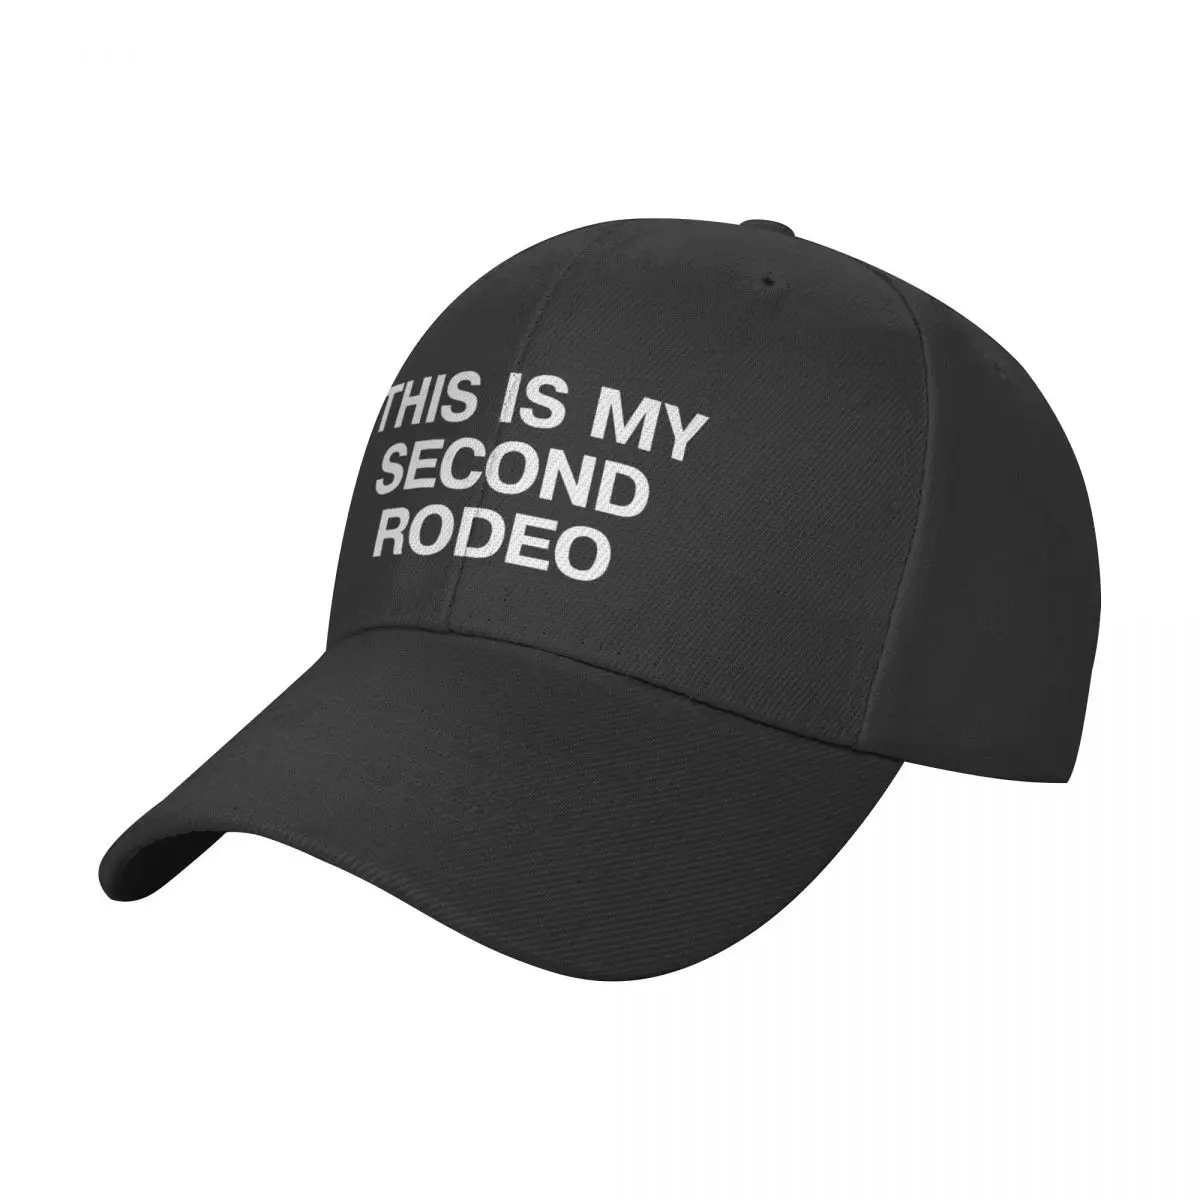 

THIS IS MY SECOND RODEO in plain white all caps letters - cos you're not the noob, but barely Baseball Cap